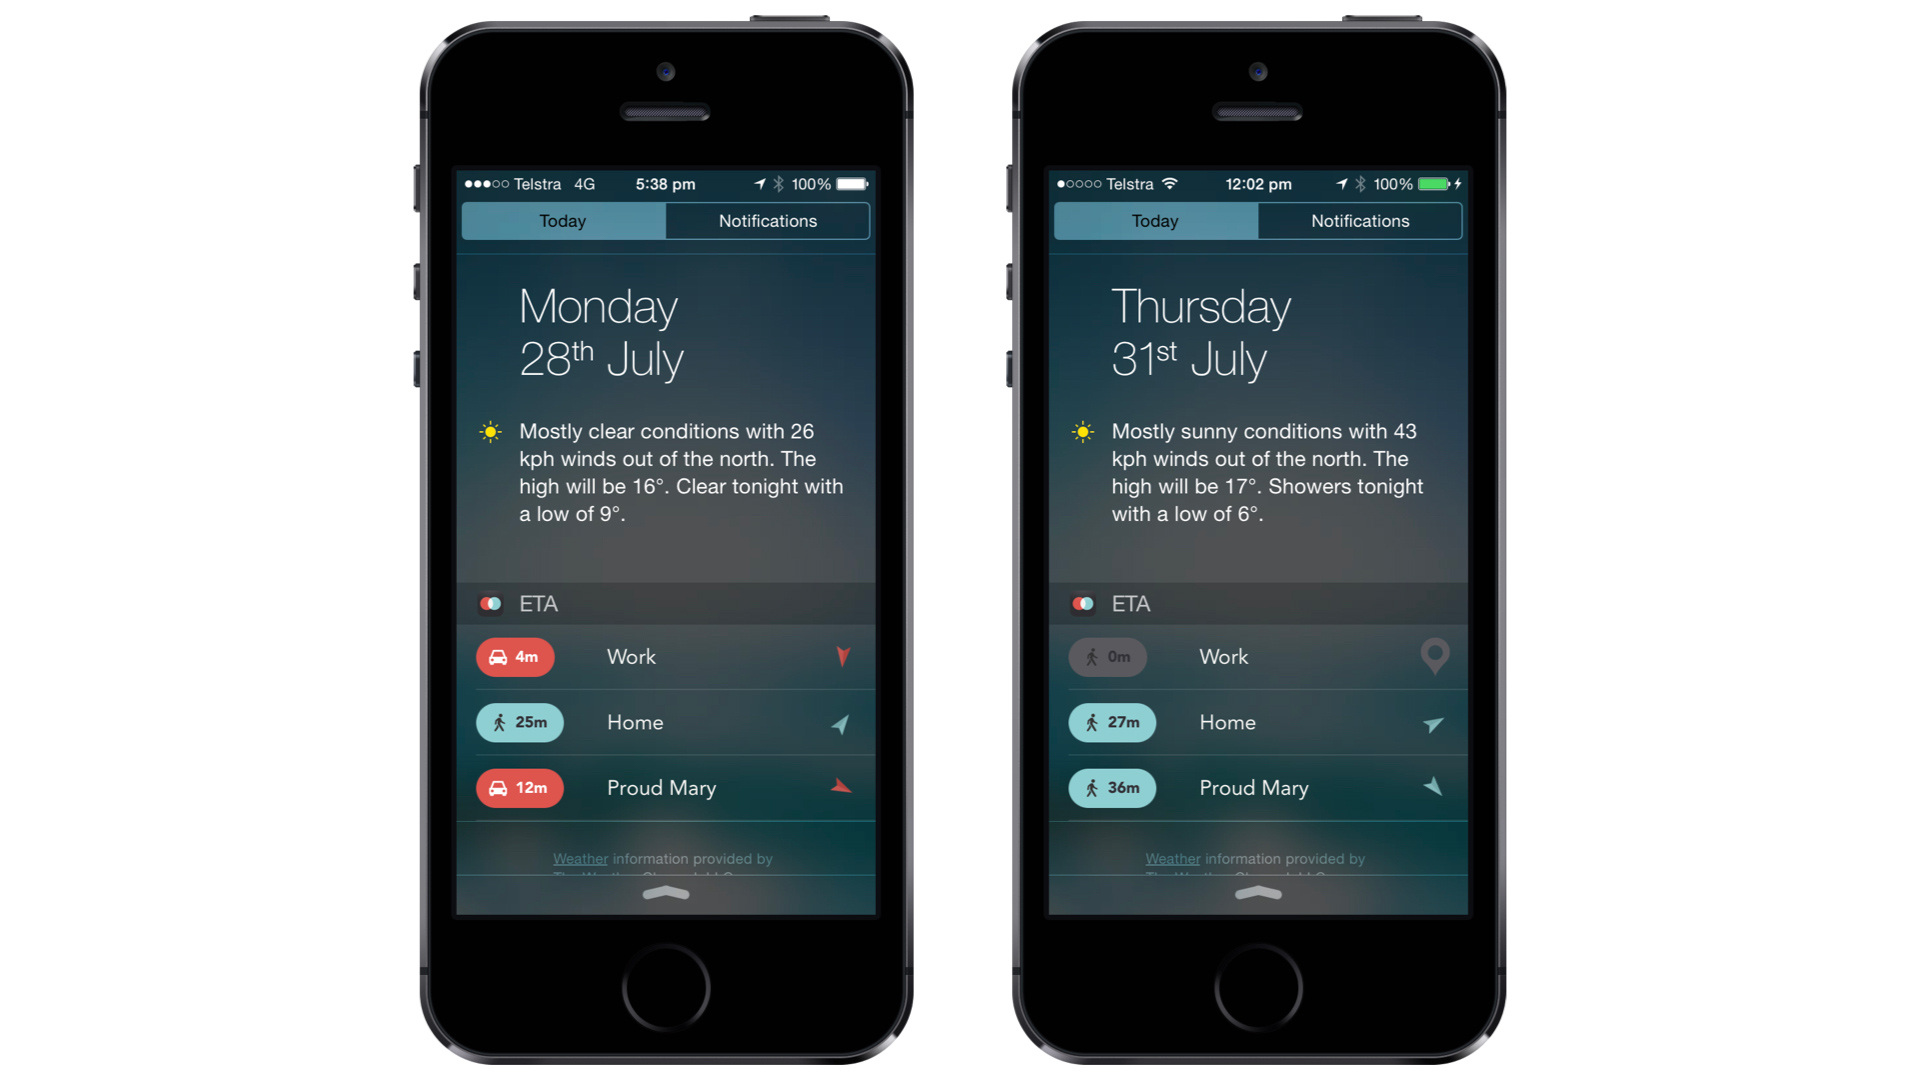 Looking back at our iOS 8 Today View widgets